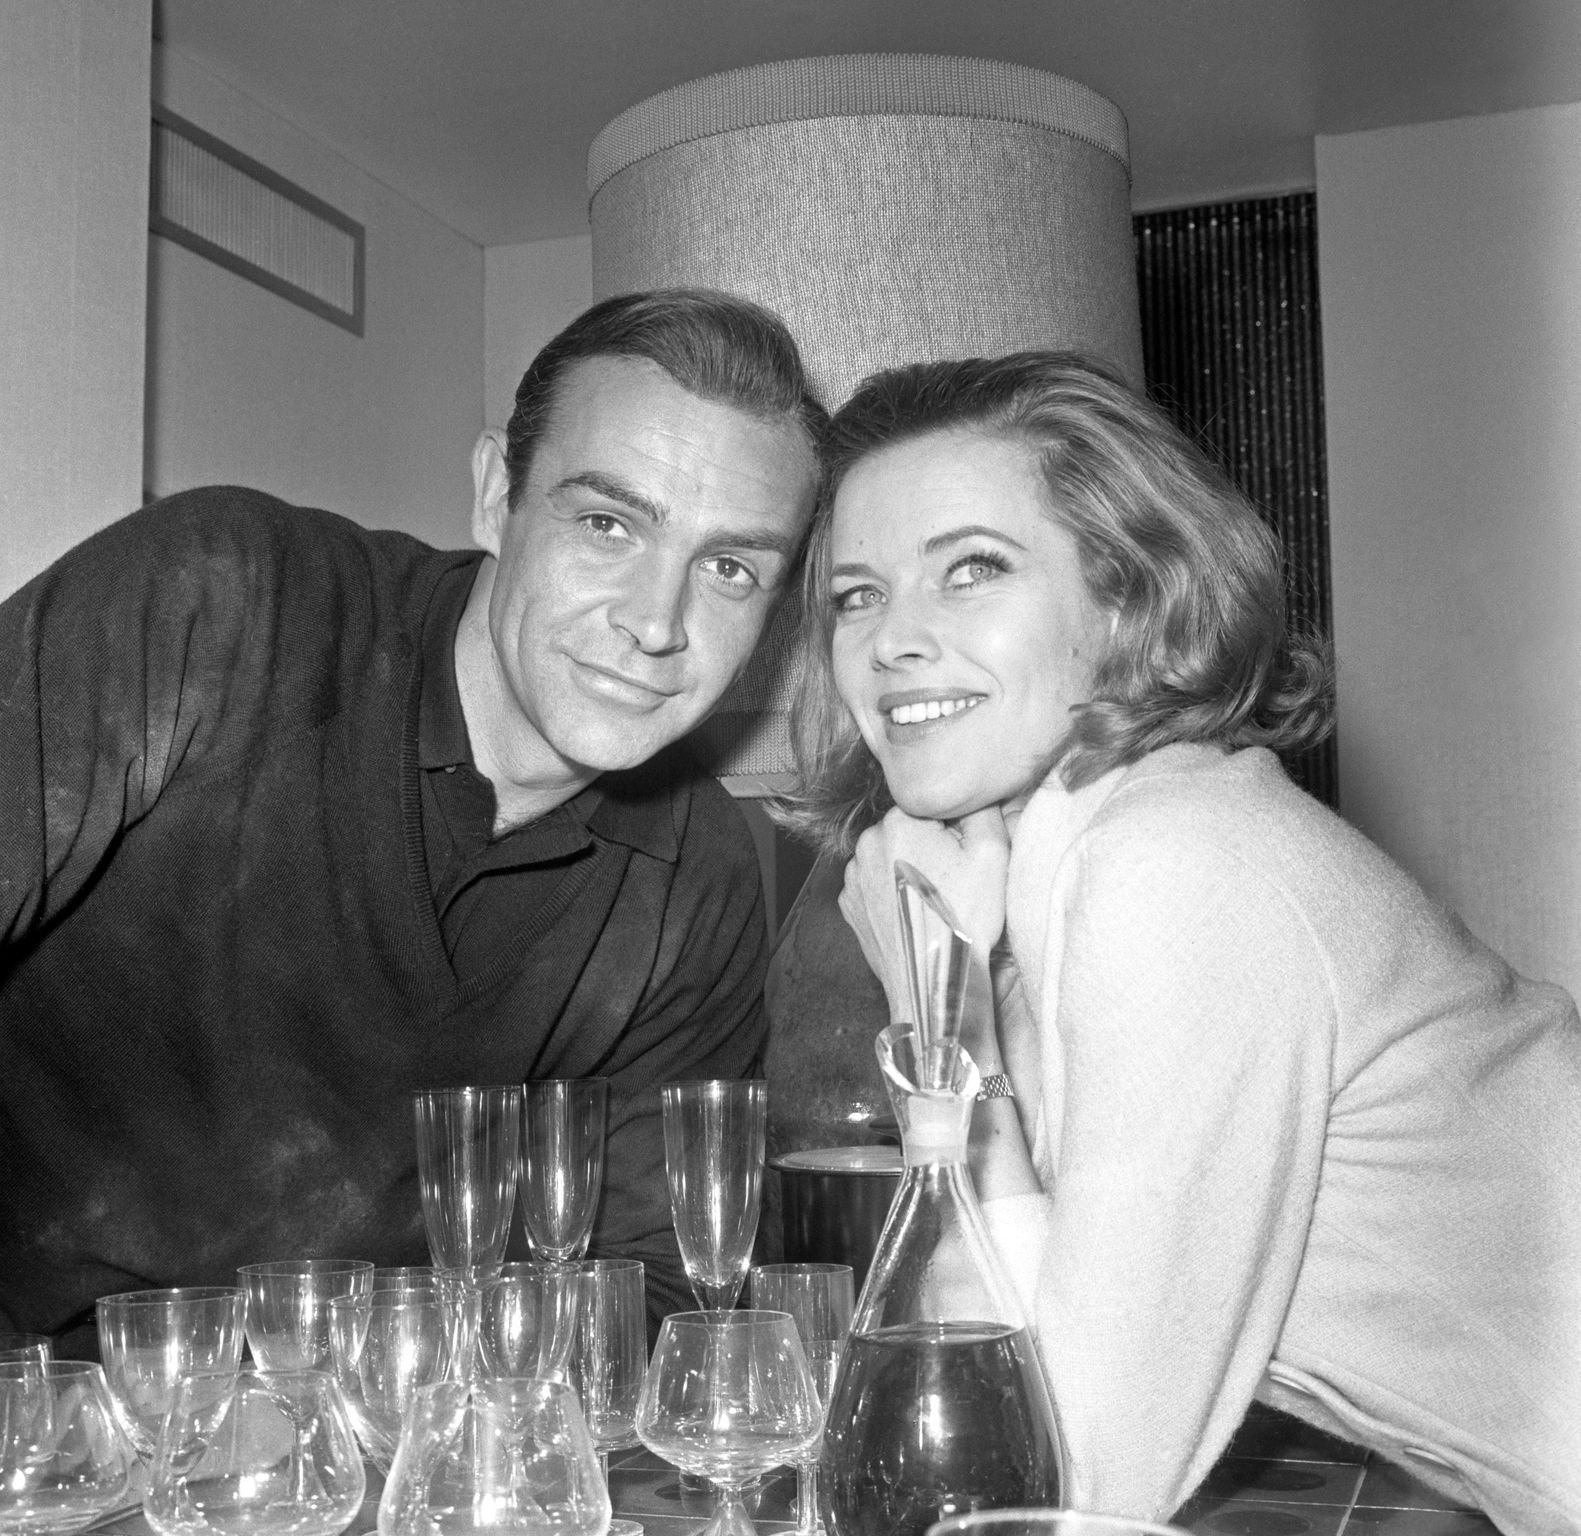 Honor Blackman and Sean Connery before the filming of "Goldfinger" | Source: Getty Images